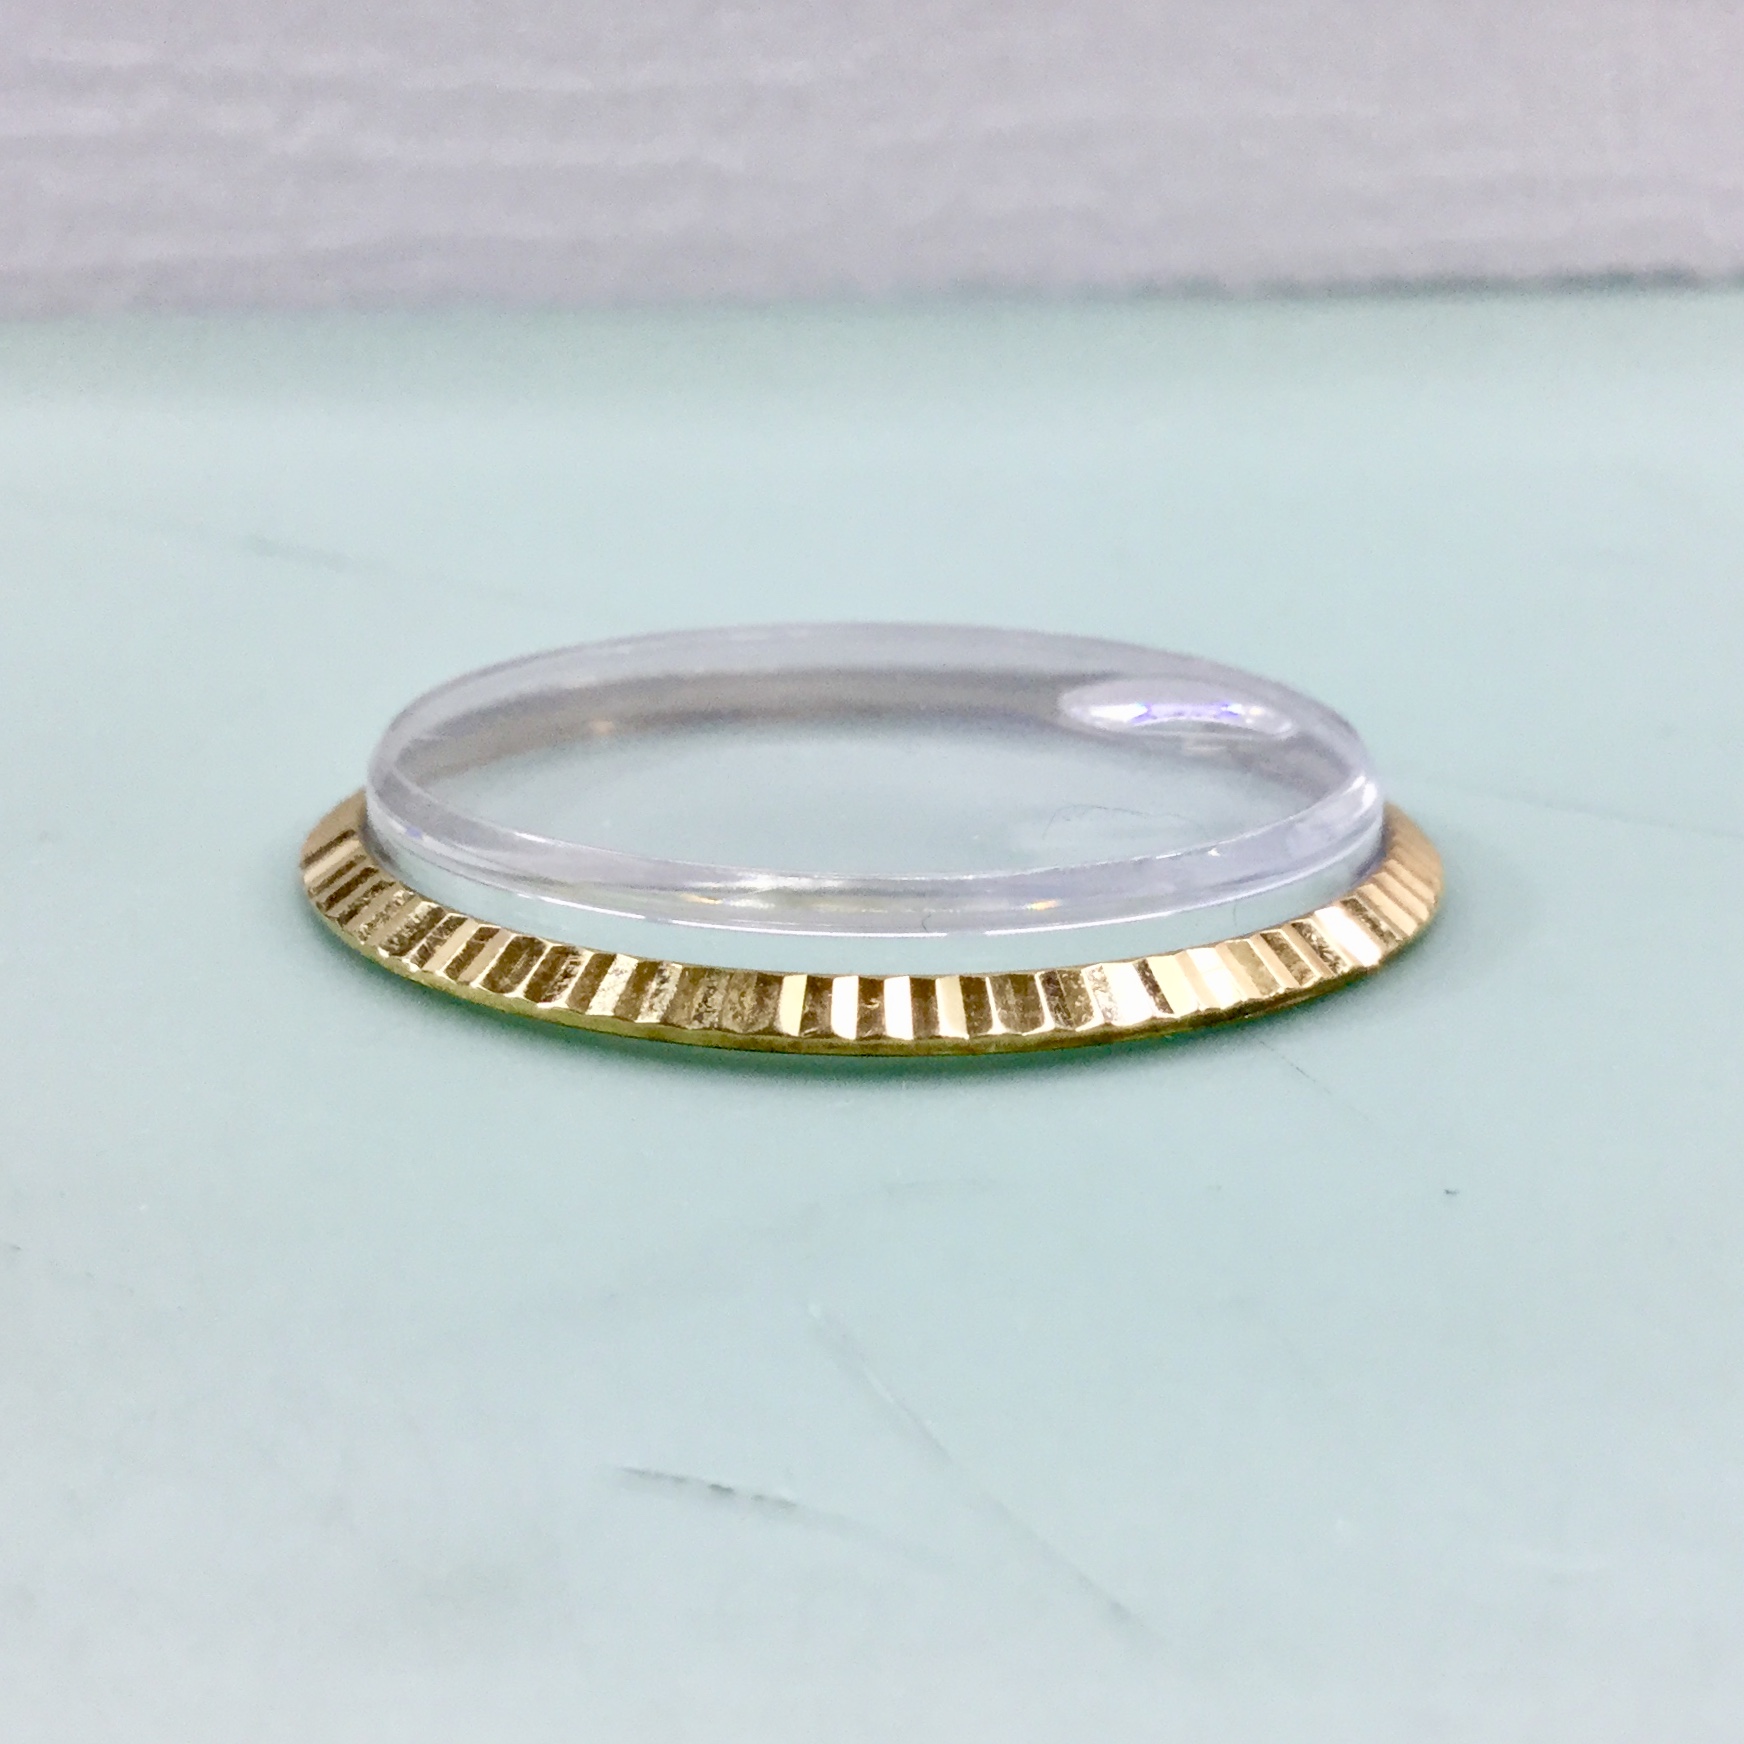 rolex glass replacement cost